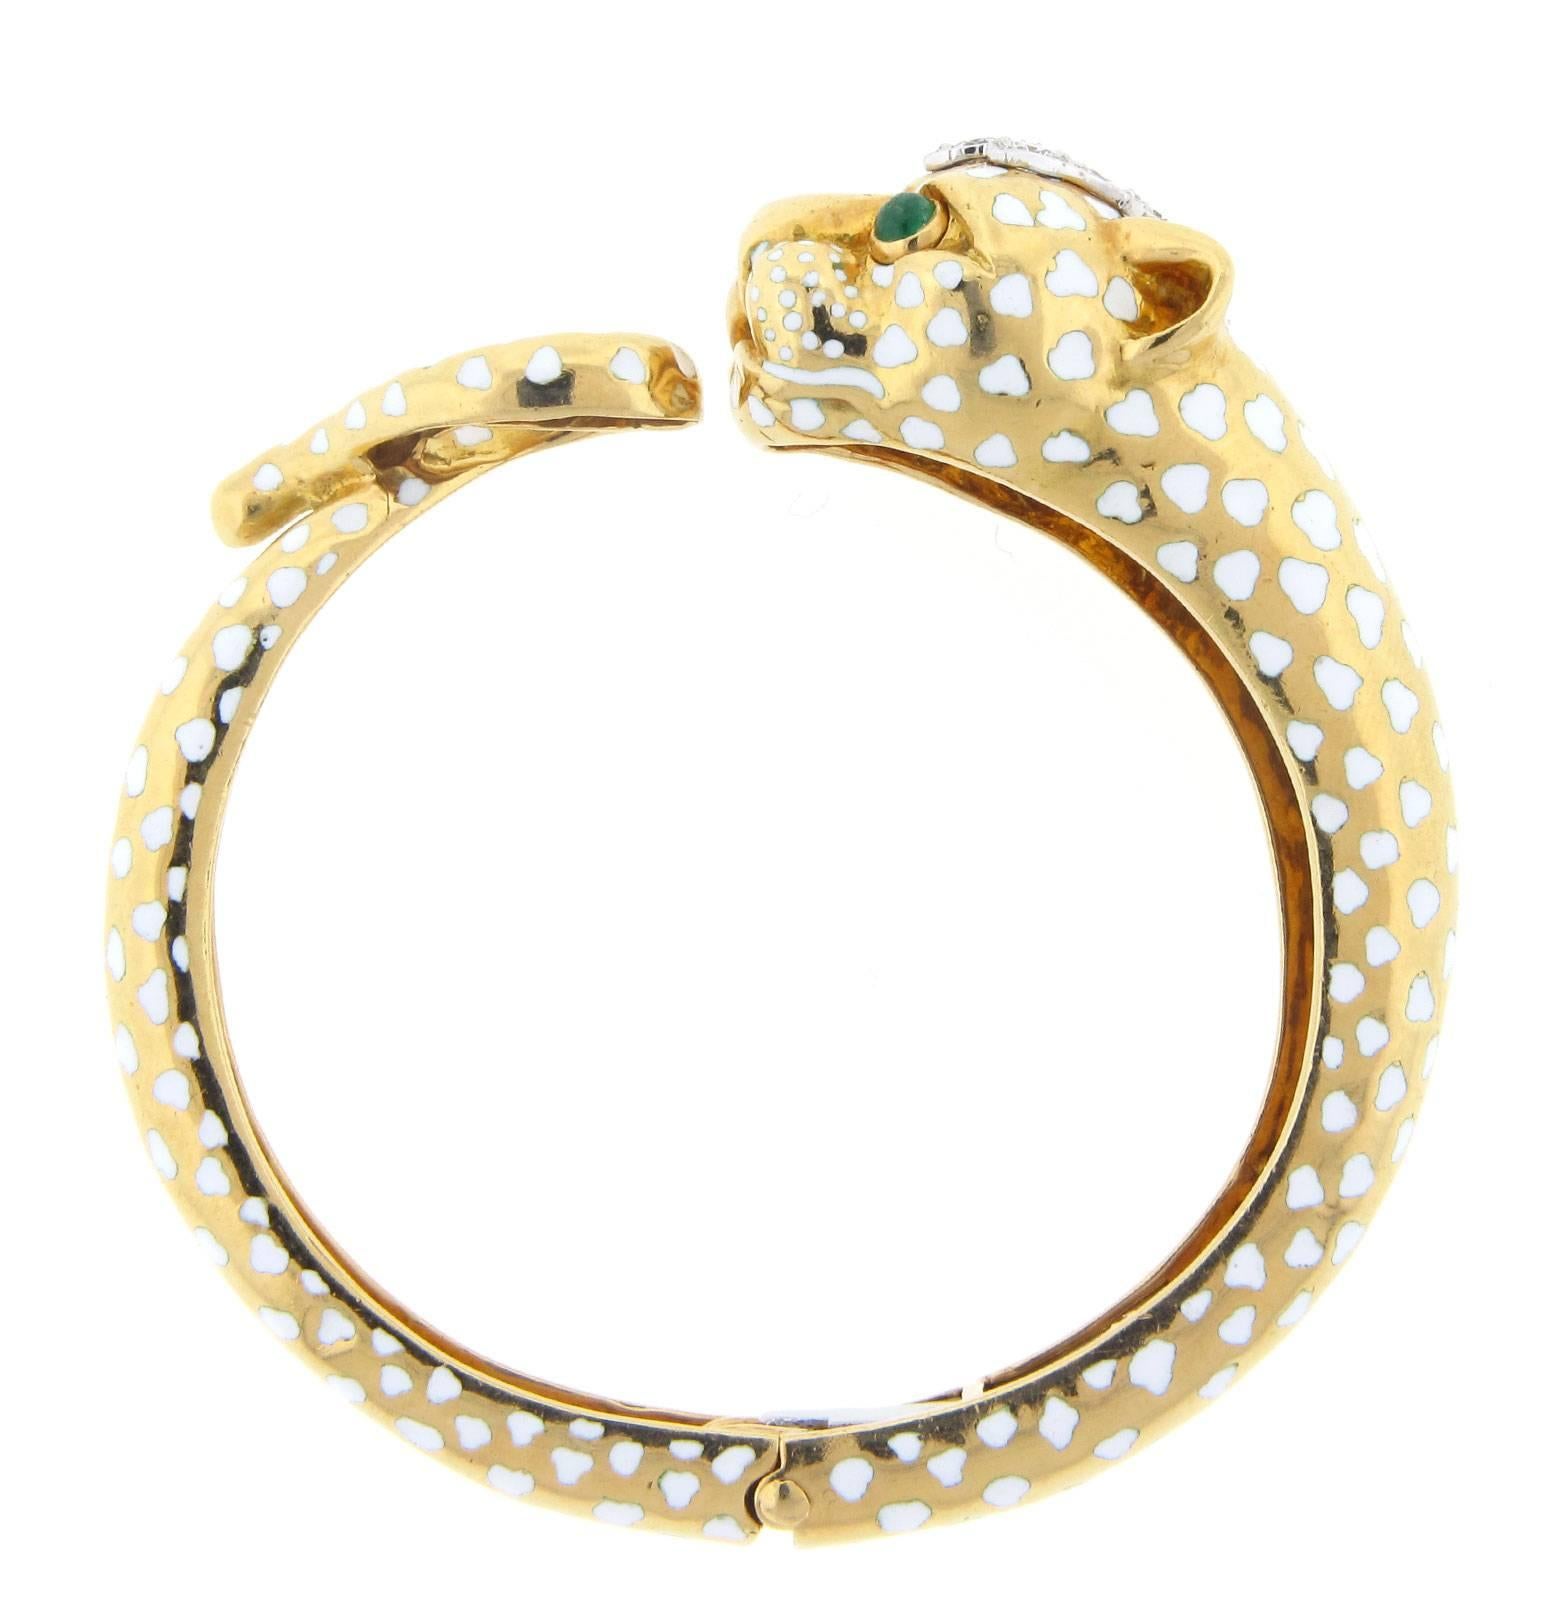 Vintage David Webb Panther Collection bangle. The bangle is made of 18K yellow gold and weighs 38.80 DWT (approx. 60.34 grams). It also has eight round G-color, VS-clarity diamonds weighing 1.00 CTTW, and two cabochon emeralds.